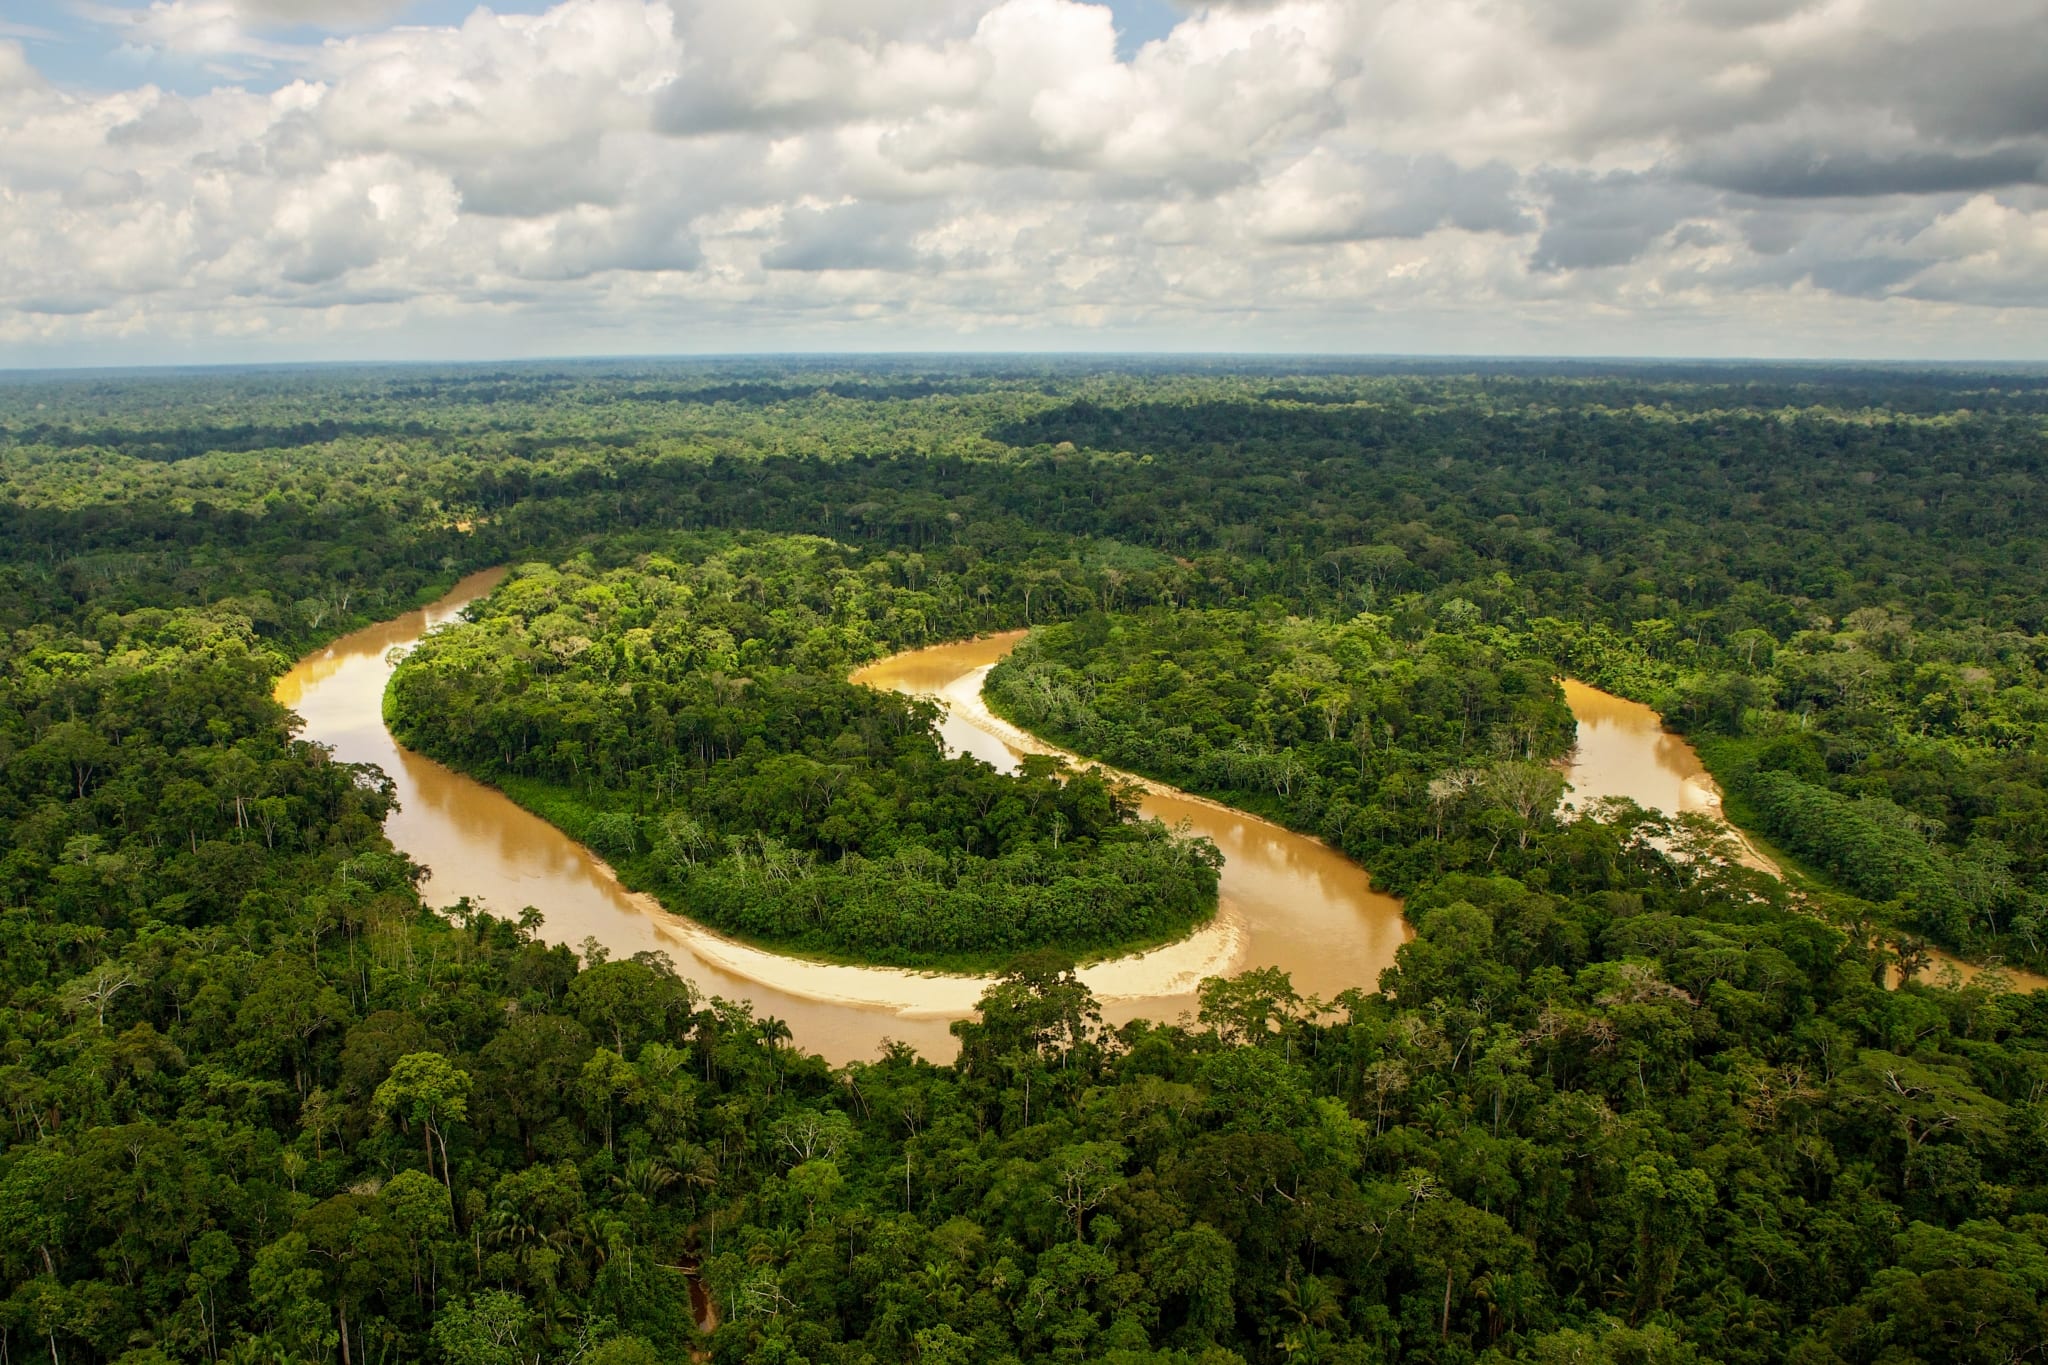 An image of the amazon river winding within the forest. Full credit to CEDIA